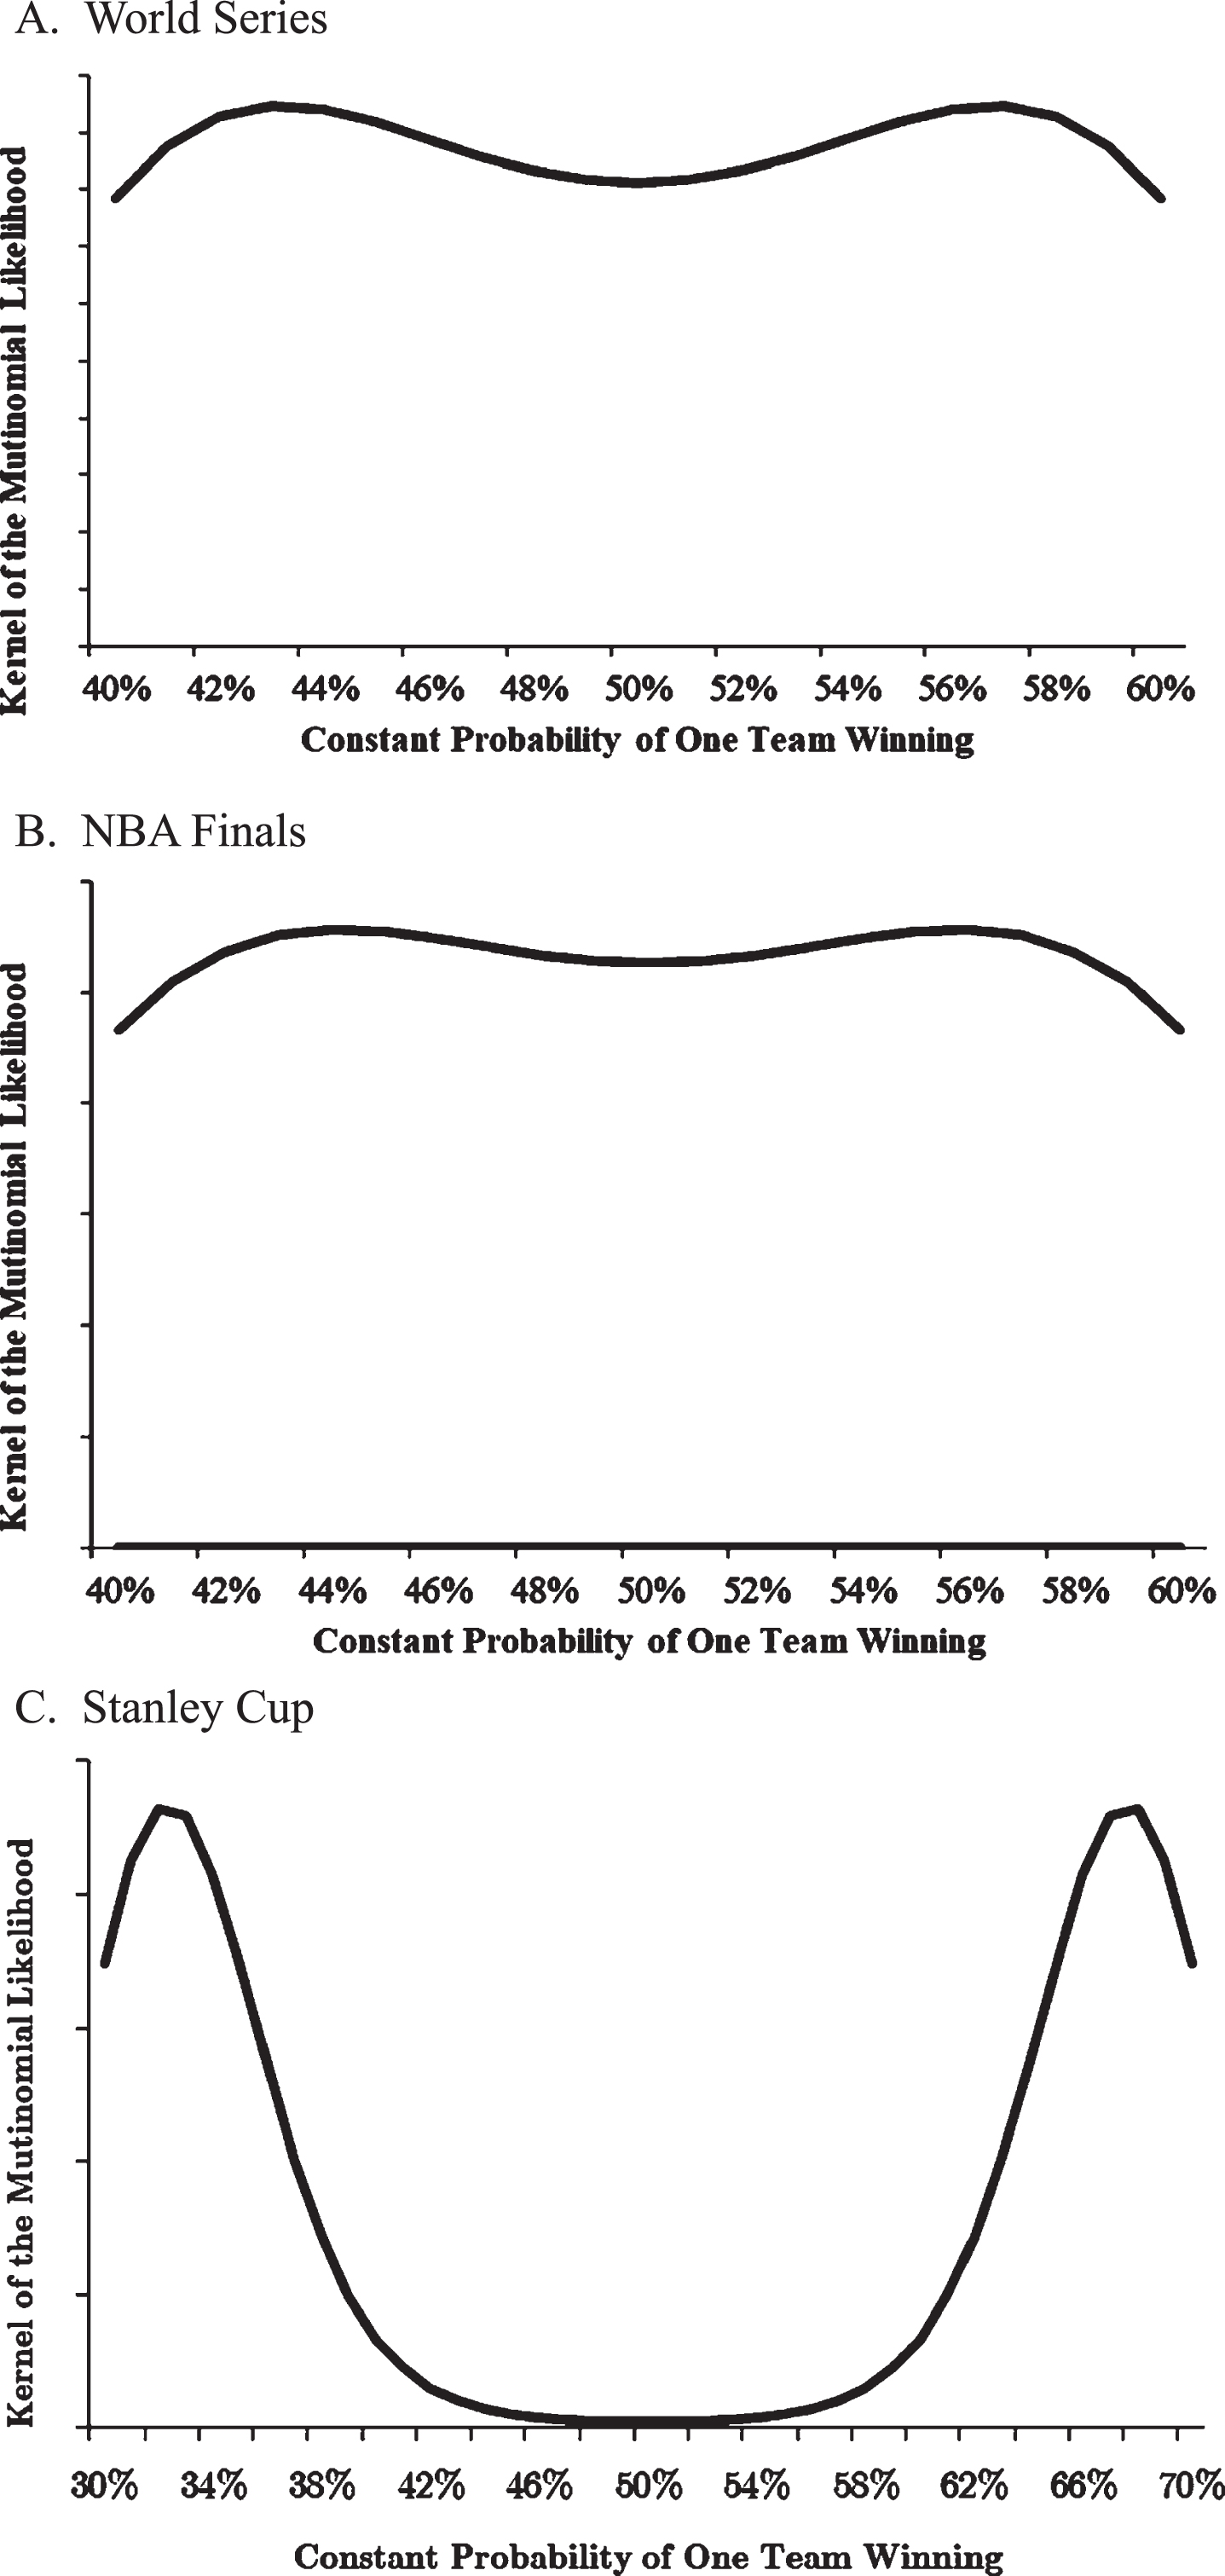 Maximum Likelihood Estimate of Constant Probability of One Team Winning the World Series, NBA Finals, and Stanley Cup. A. World Series. B. NBA Finals. C. Stanley Cup. The line is the value pL (0) N(4)pL (1) N(5)pL (2) N(6)pL (3) N(7), ,which is the kernel of the multinomial likelihood function where pL (j) is the probability that the team that loses the series wins j games (j = 0, 1, 2, or 3) and N(i) is the number of four-, five-, six-, and seven-game series that have occurred. The observed maxima identify the maximum likelihood estimates of a constant probability of one team winning.